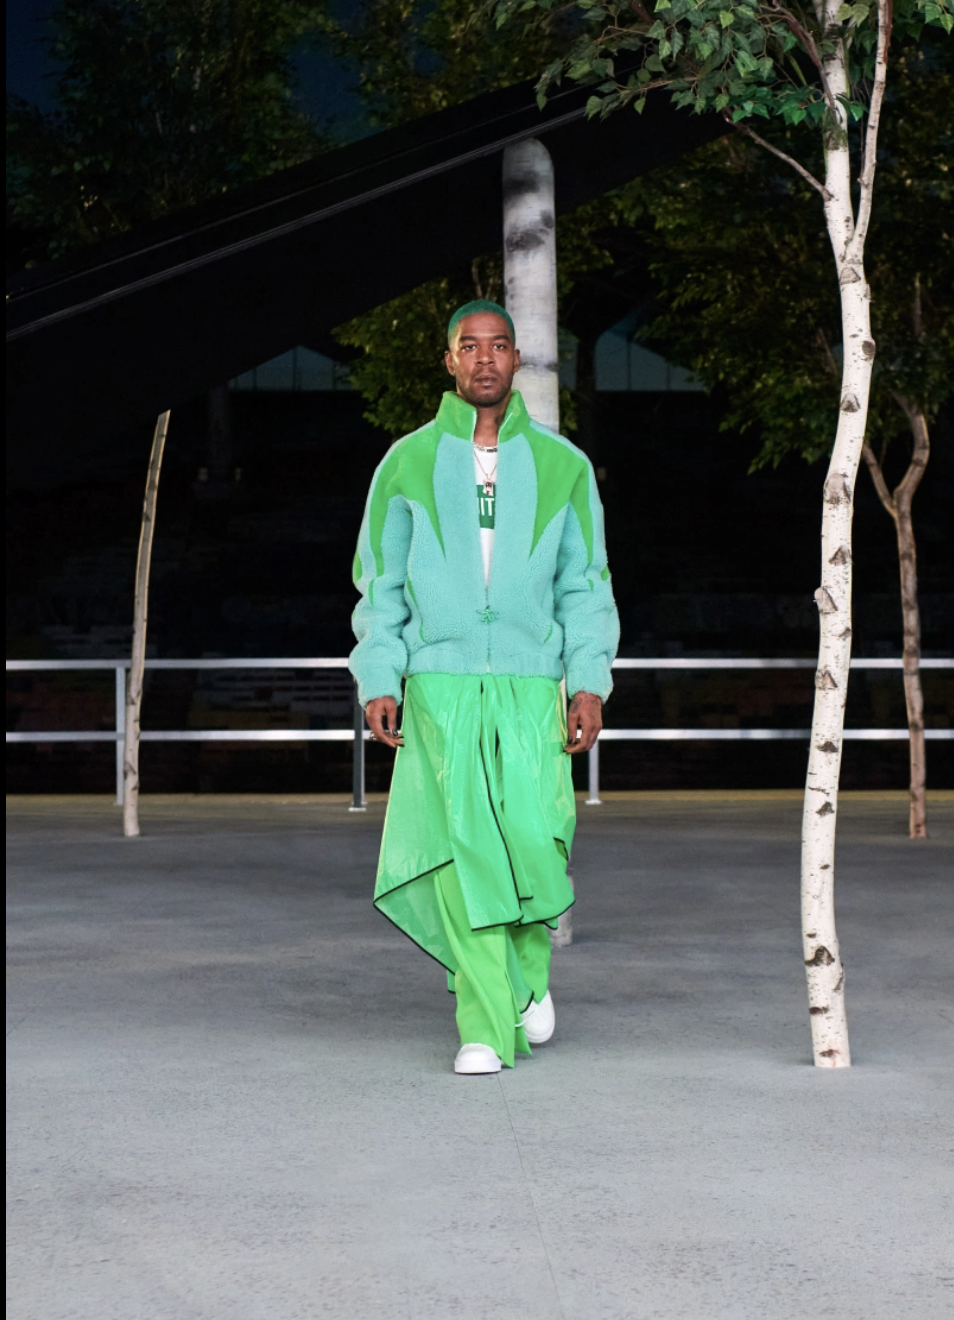 Louis Vuitton honors Virgil Abloh at star-studded Miami show